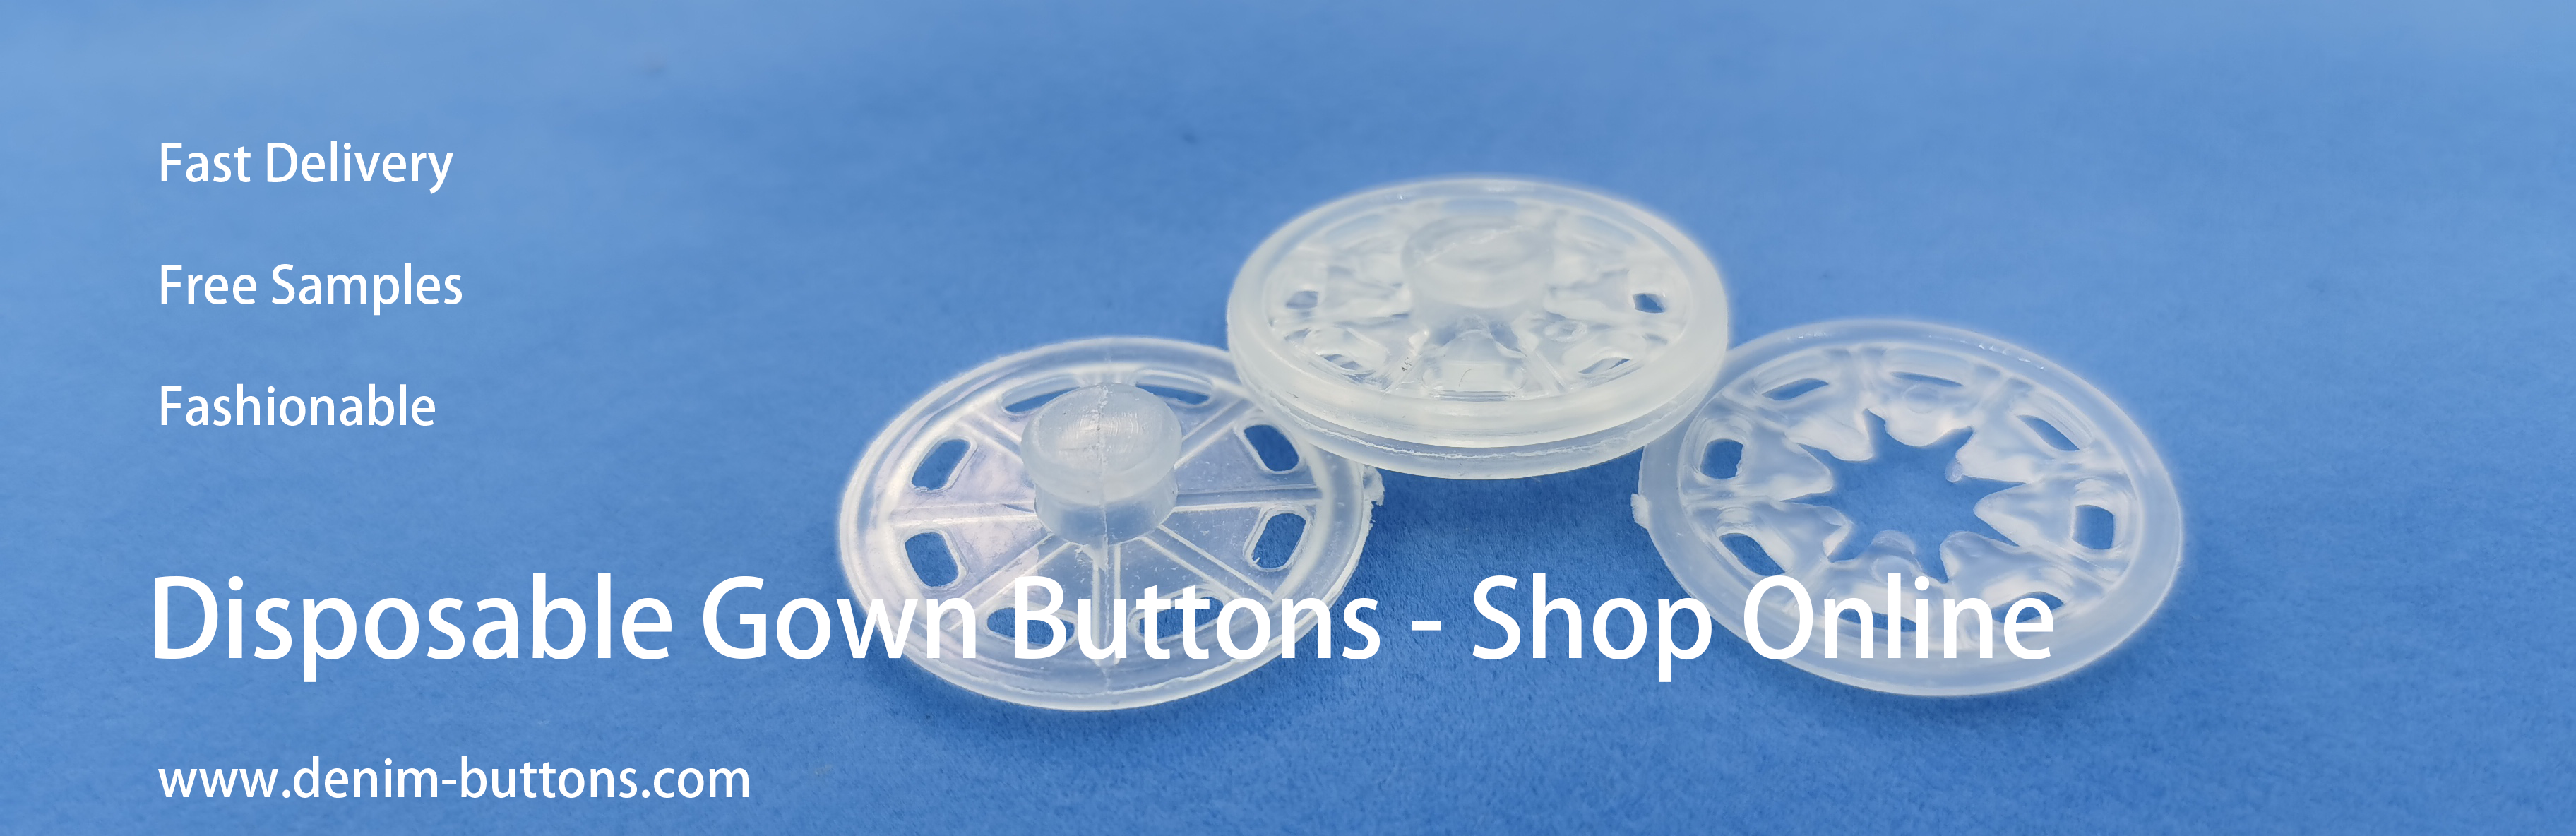 plastic snap buttons